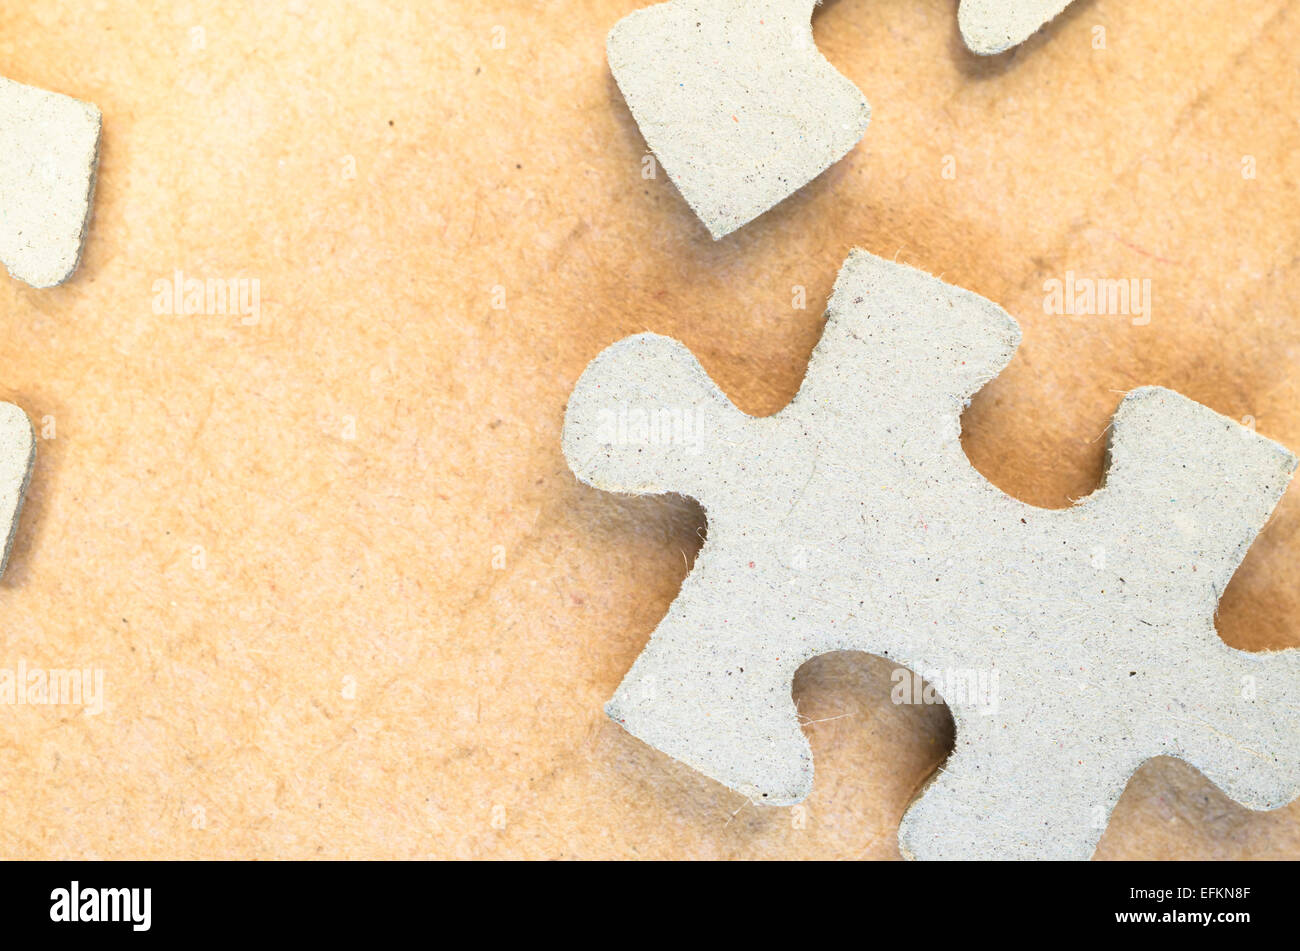 jigsaw puzzle pieces on a paperboard surface Stock Photo